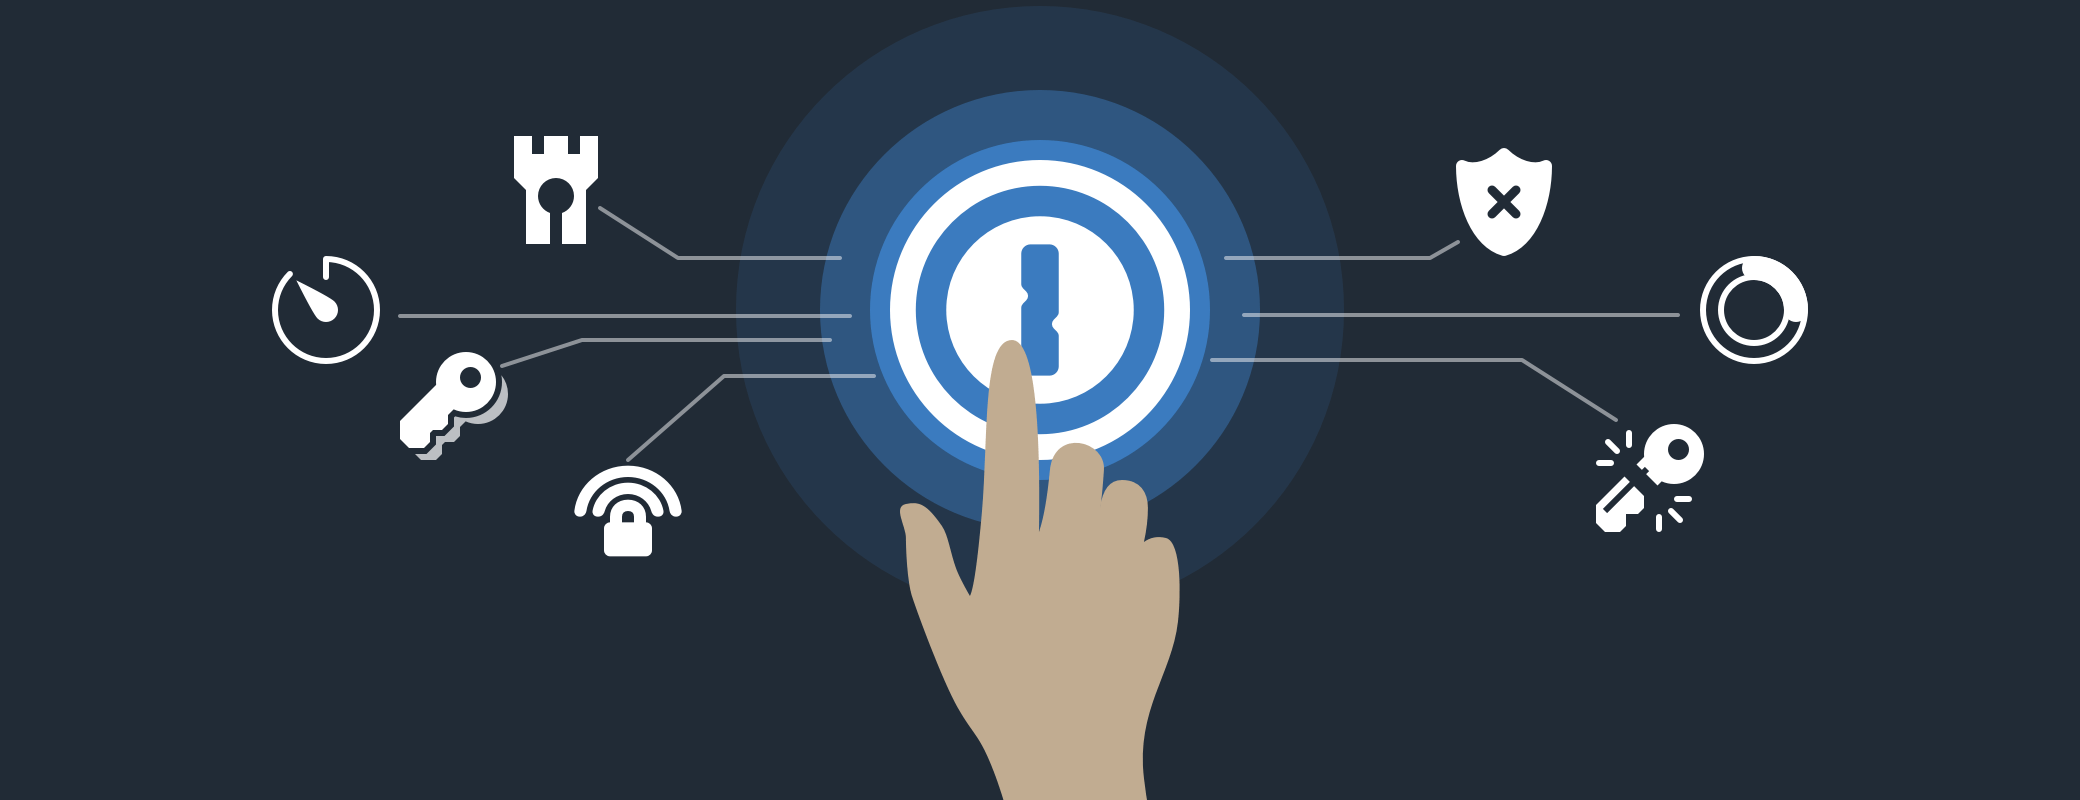 Does Australia's access and assistance law impact 1Password?